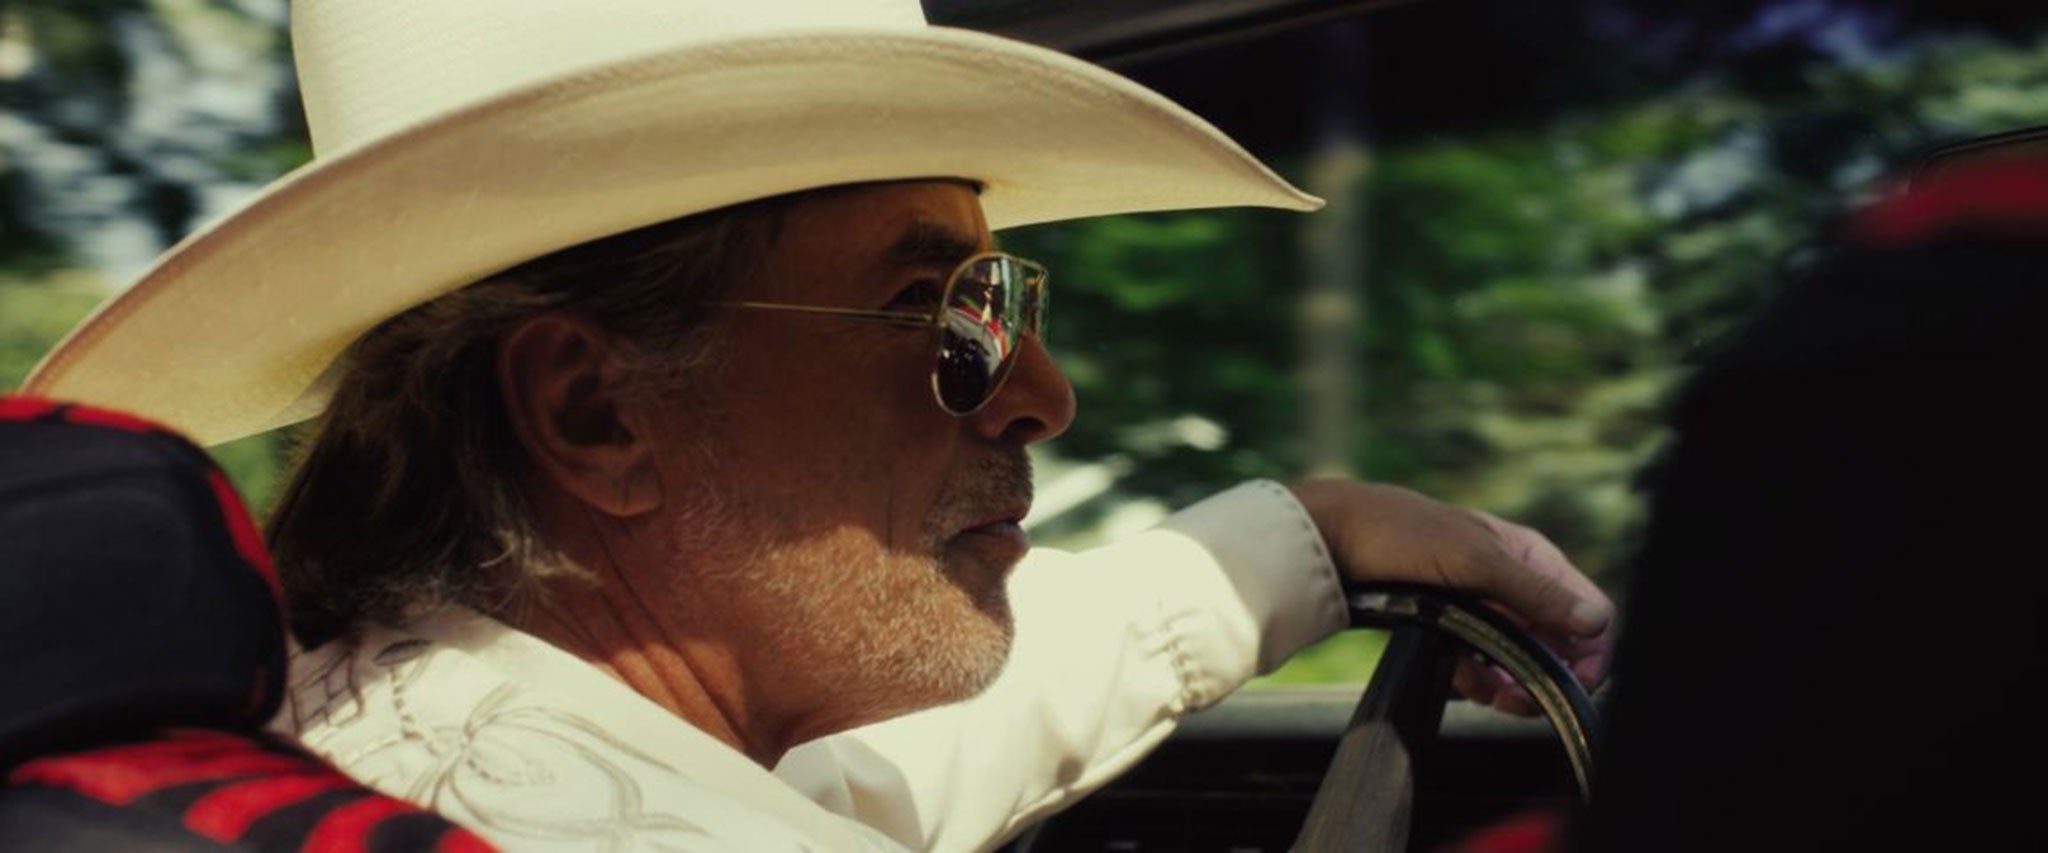 Incongruously flashy: Don Johnson's arrival changes the mood of the film